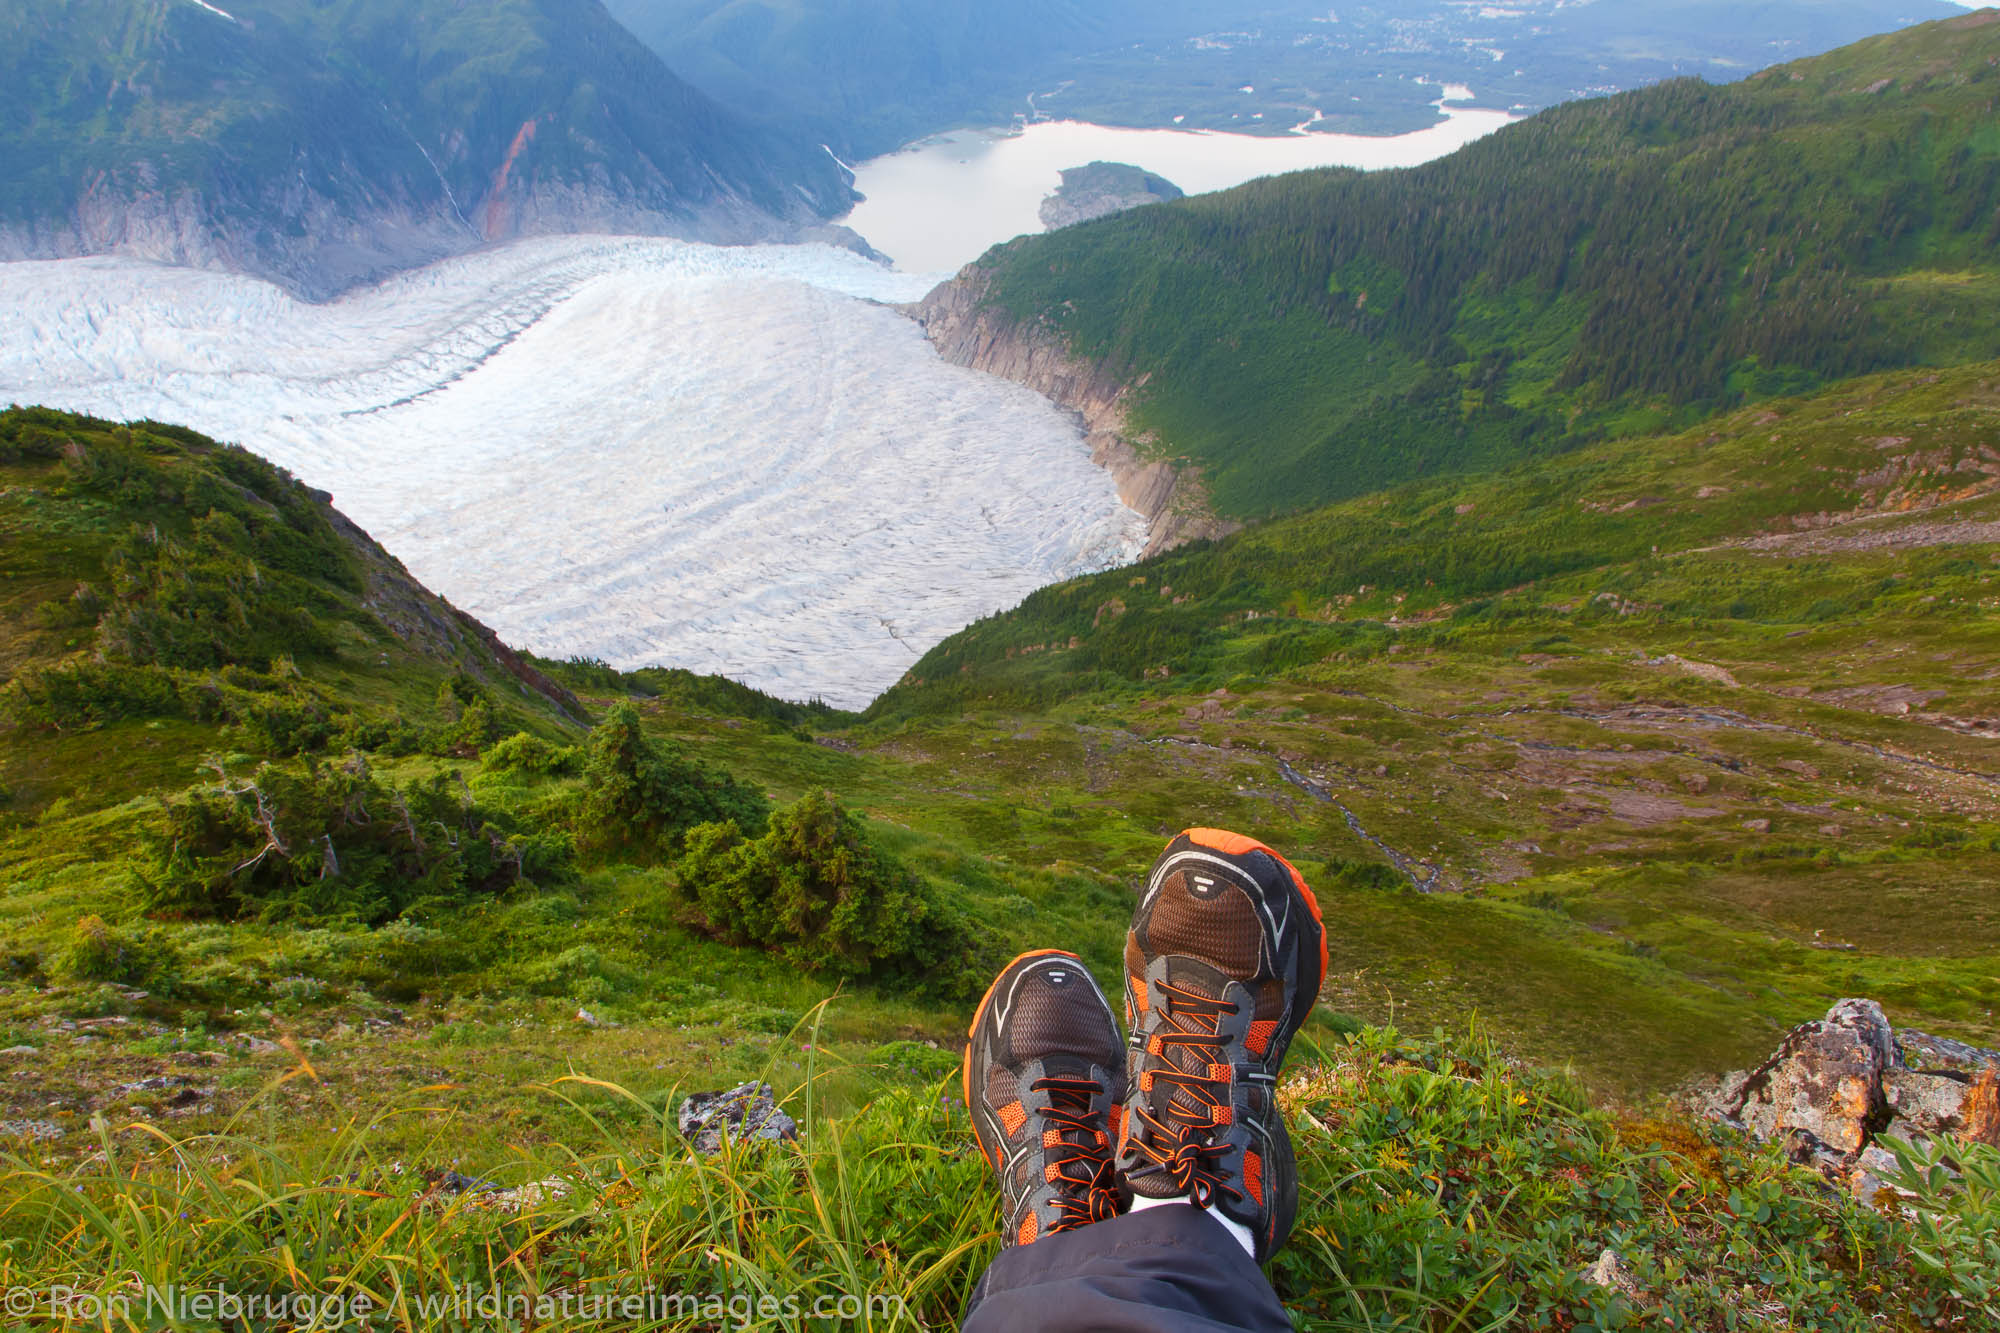 A hiker on Mount Stroller White above the Mendenhall Glacier, Tongass National Forest, Alaska.